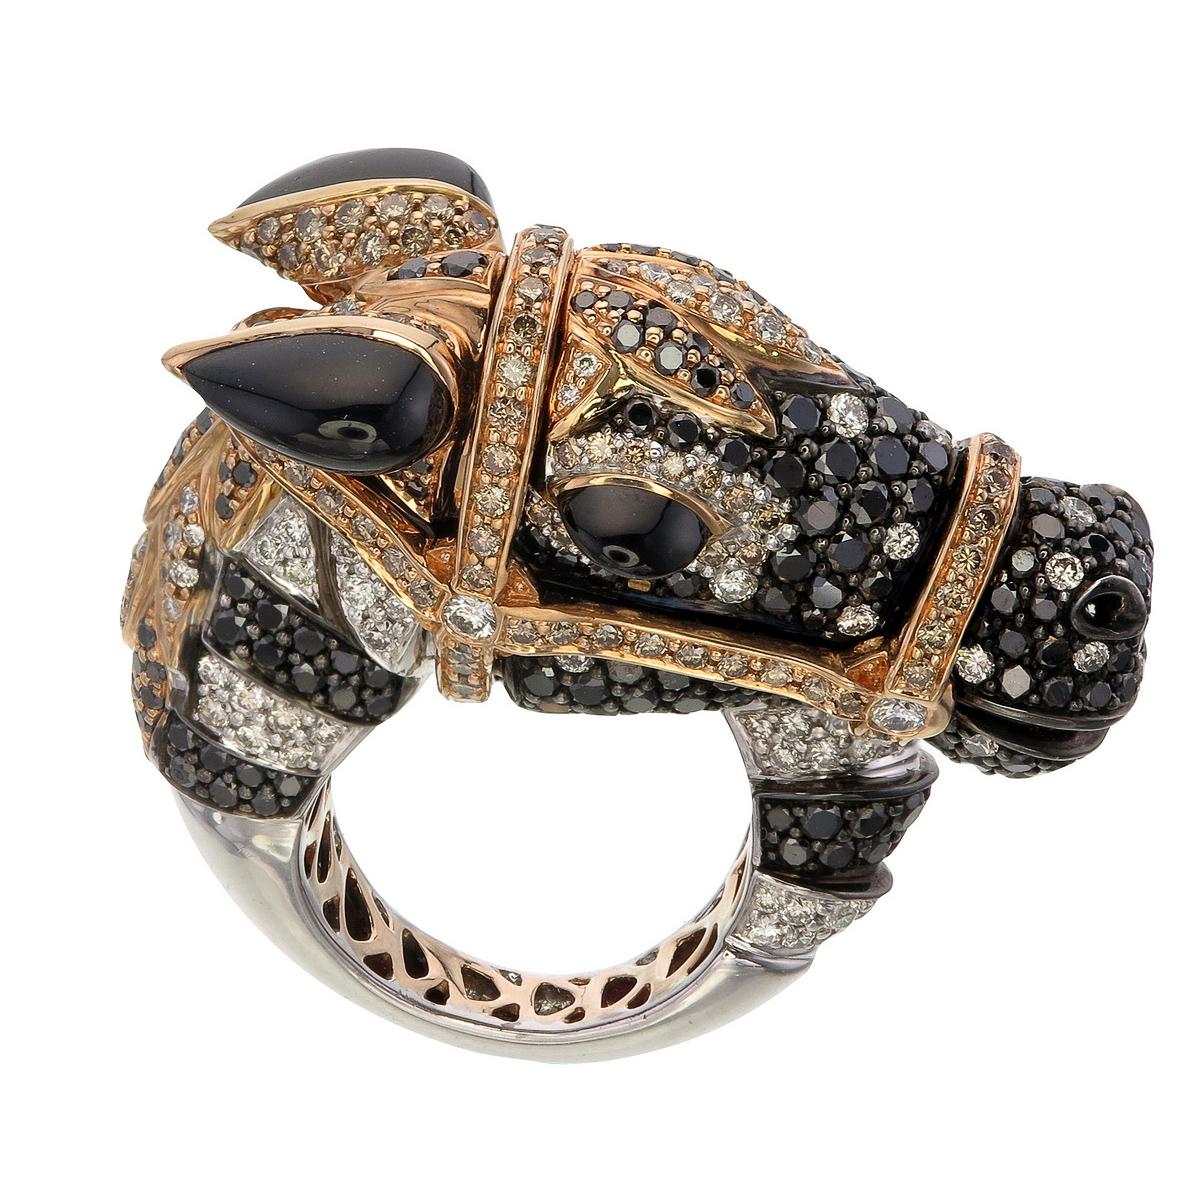 In the world of jewelry, there are pieces that transcend craftsmanship and become timeless works of art. The Arabian Elegance Ring is one such masterpiece, a dazzling tribute to the grace and majesty of the Arabian horse, crafted with the rarest of